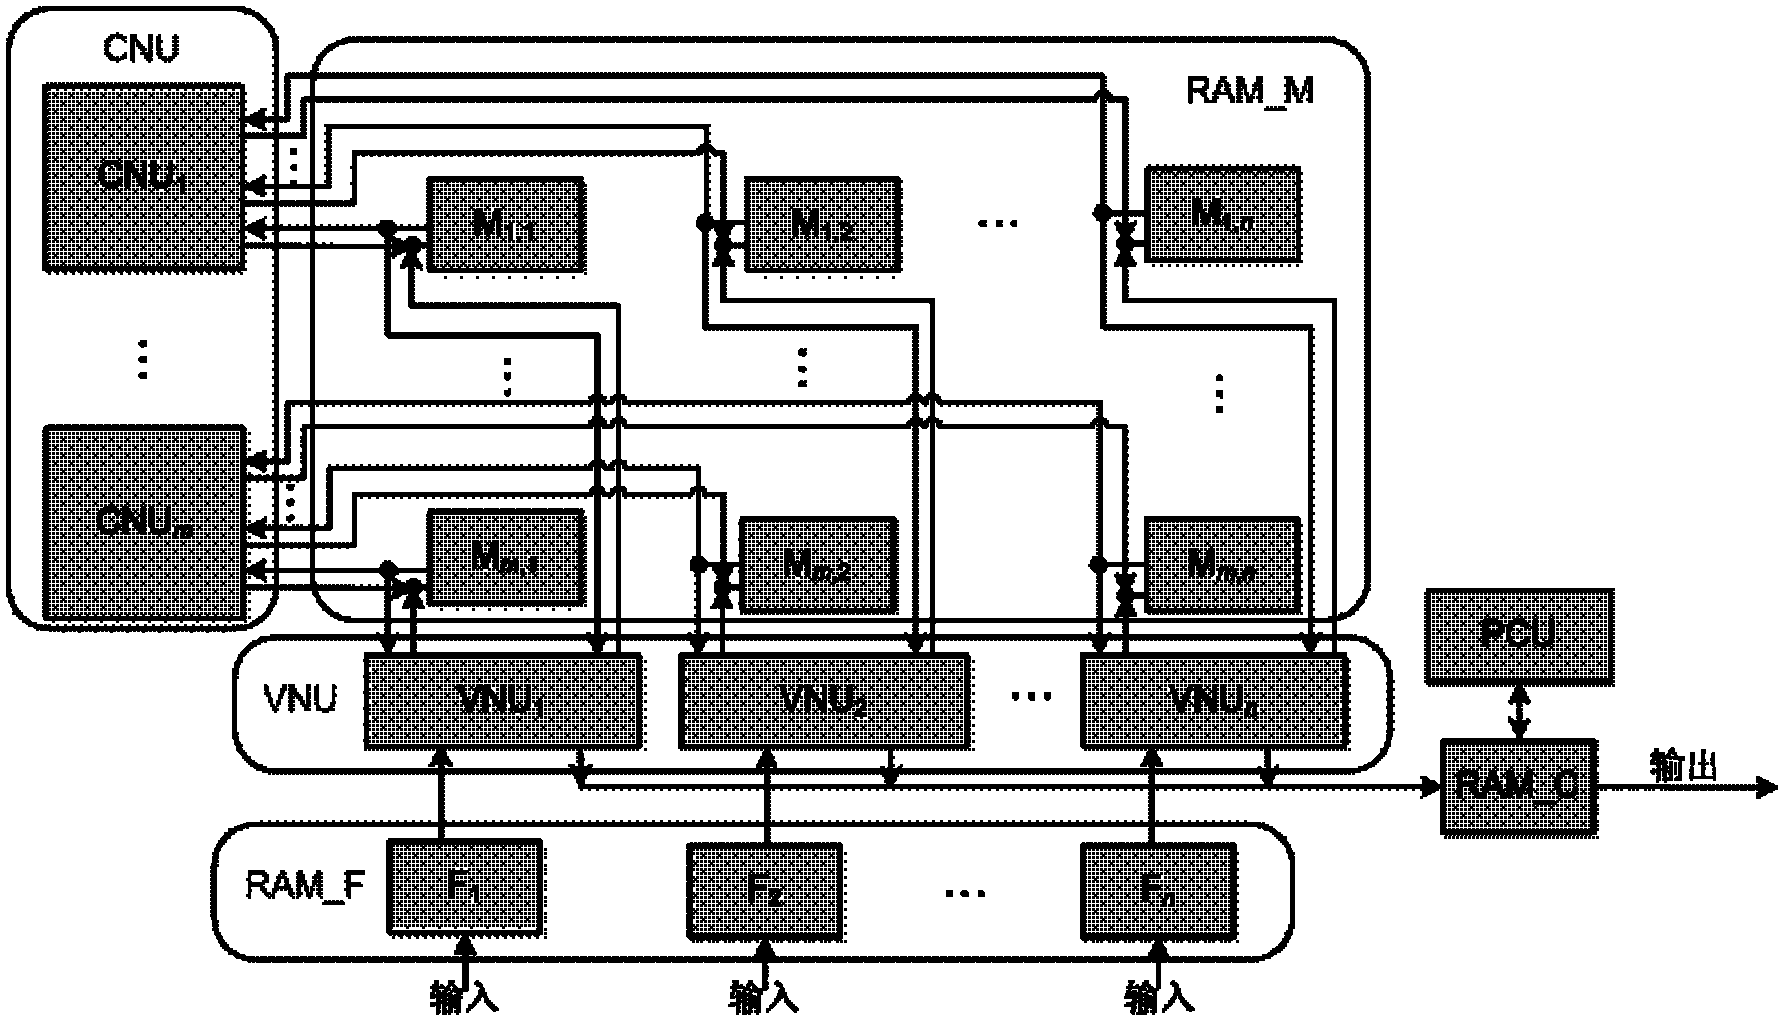 Quasi-cyclic low-density parity check code decoder based on FPGA (field-programmable gate array) and decoding method